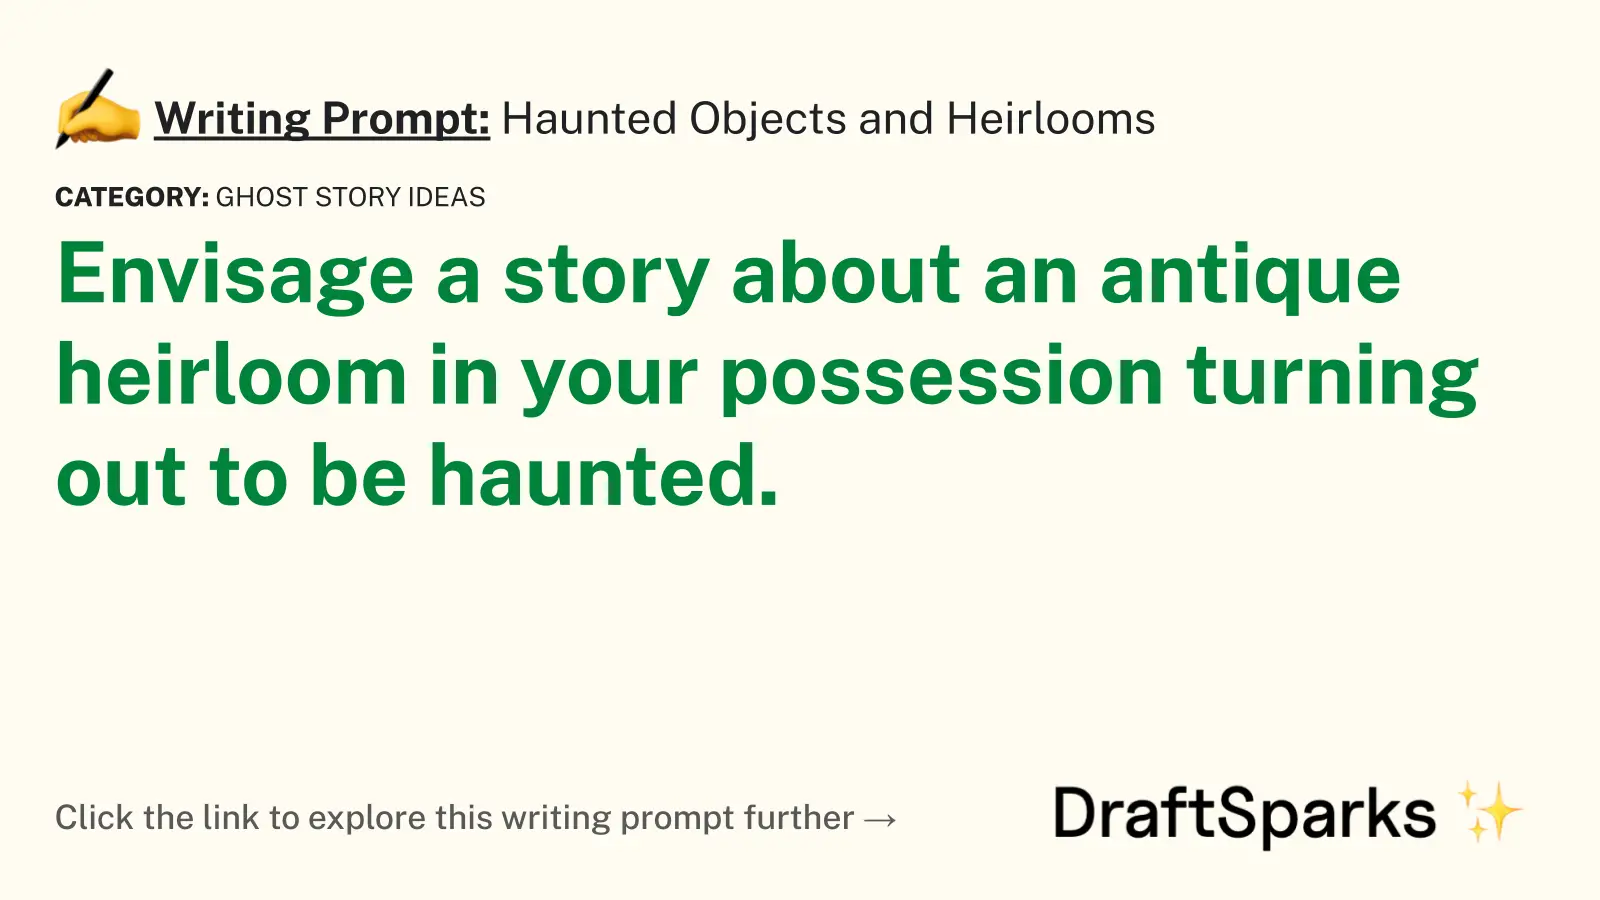 Haunted Objects and Heirlooms